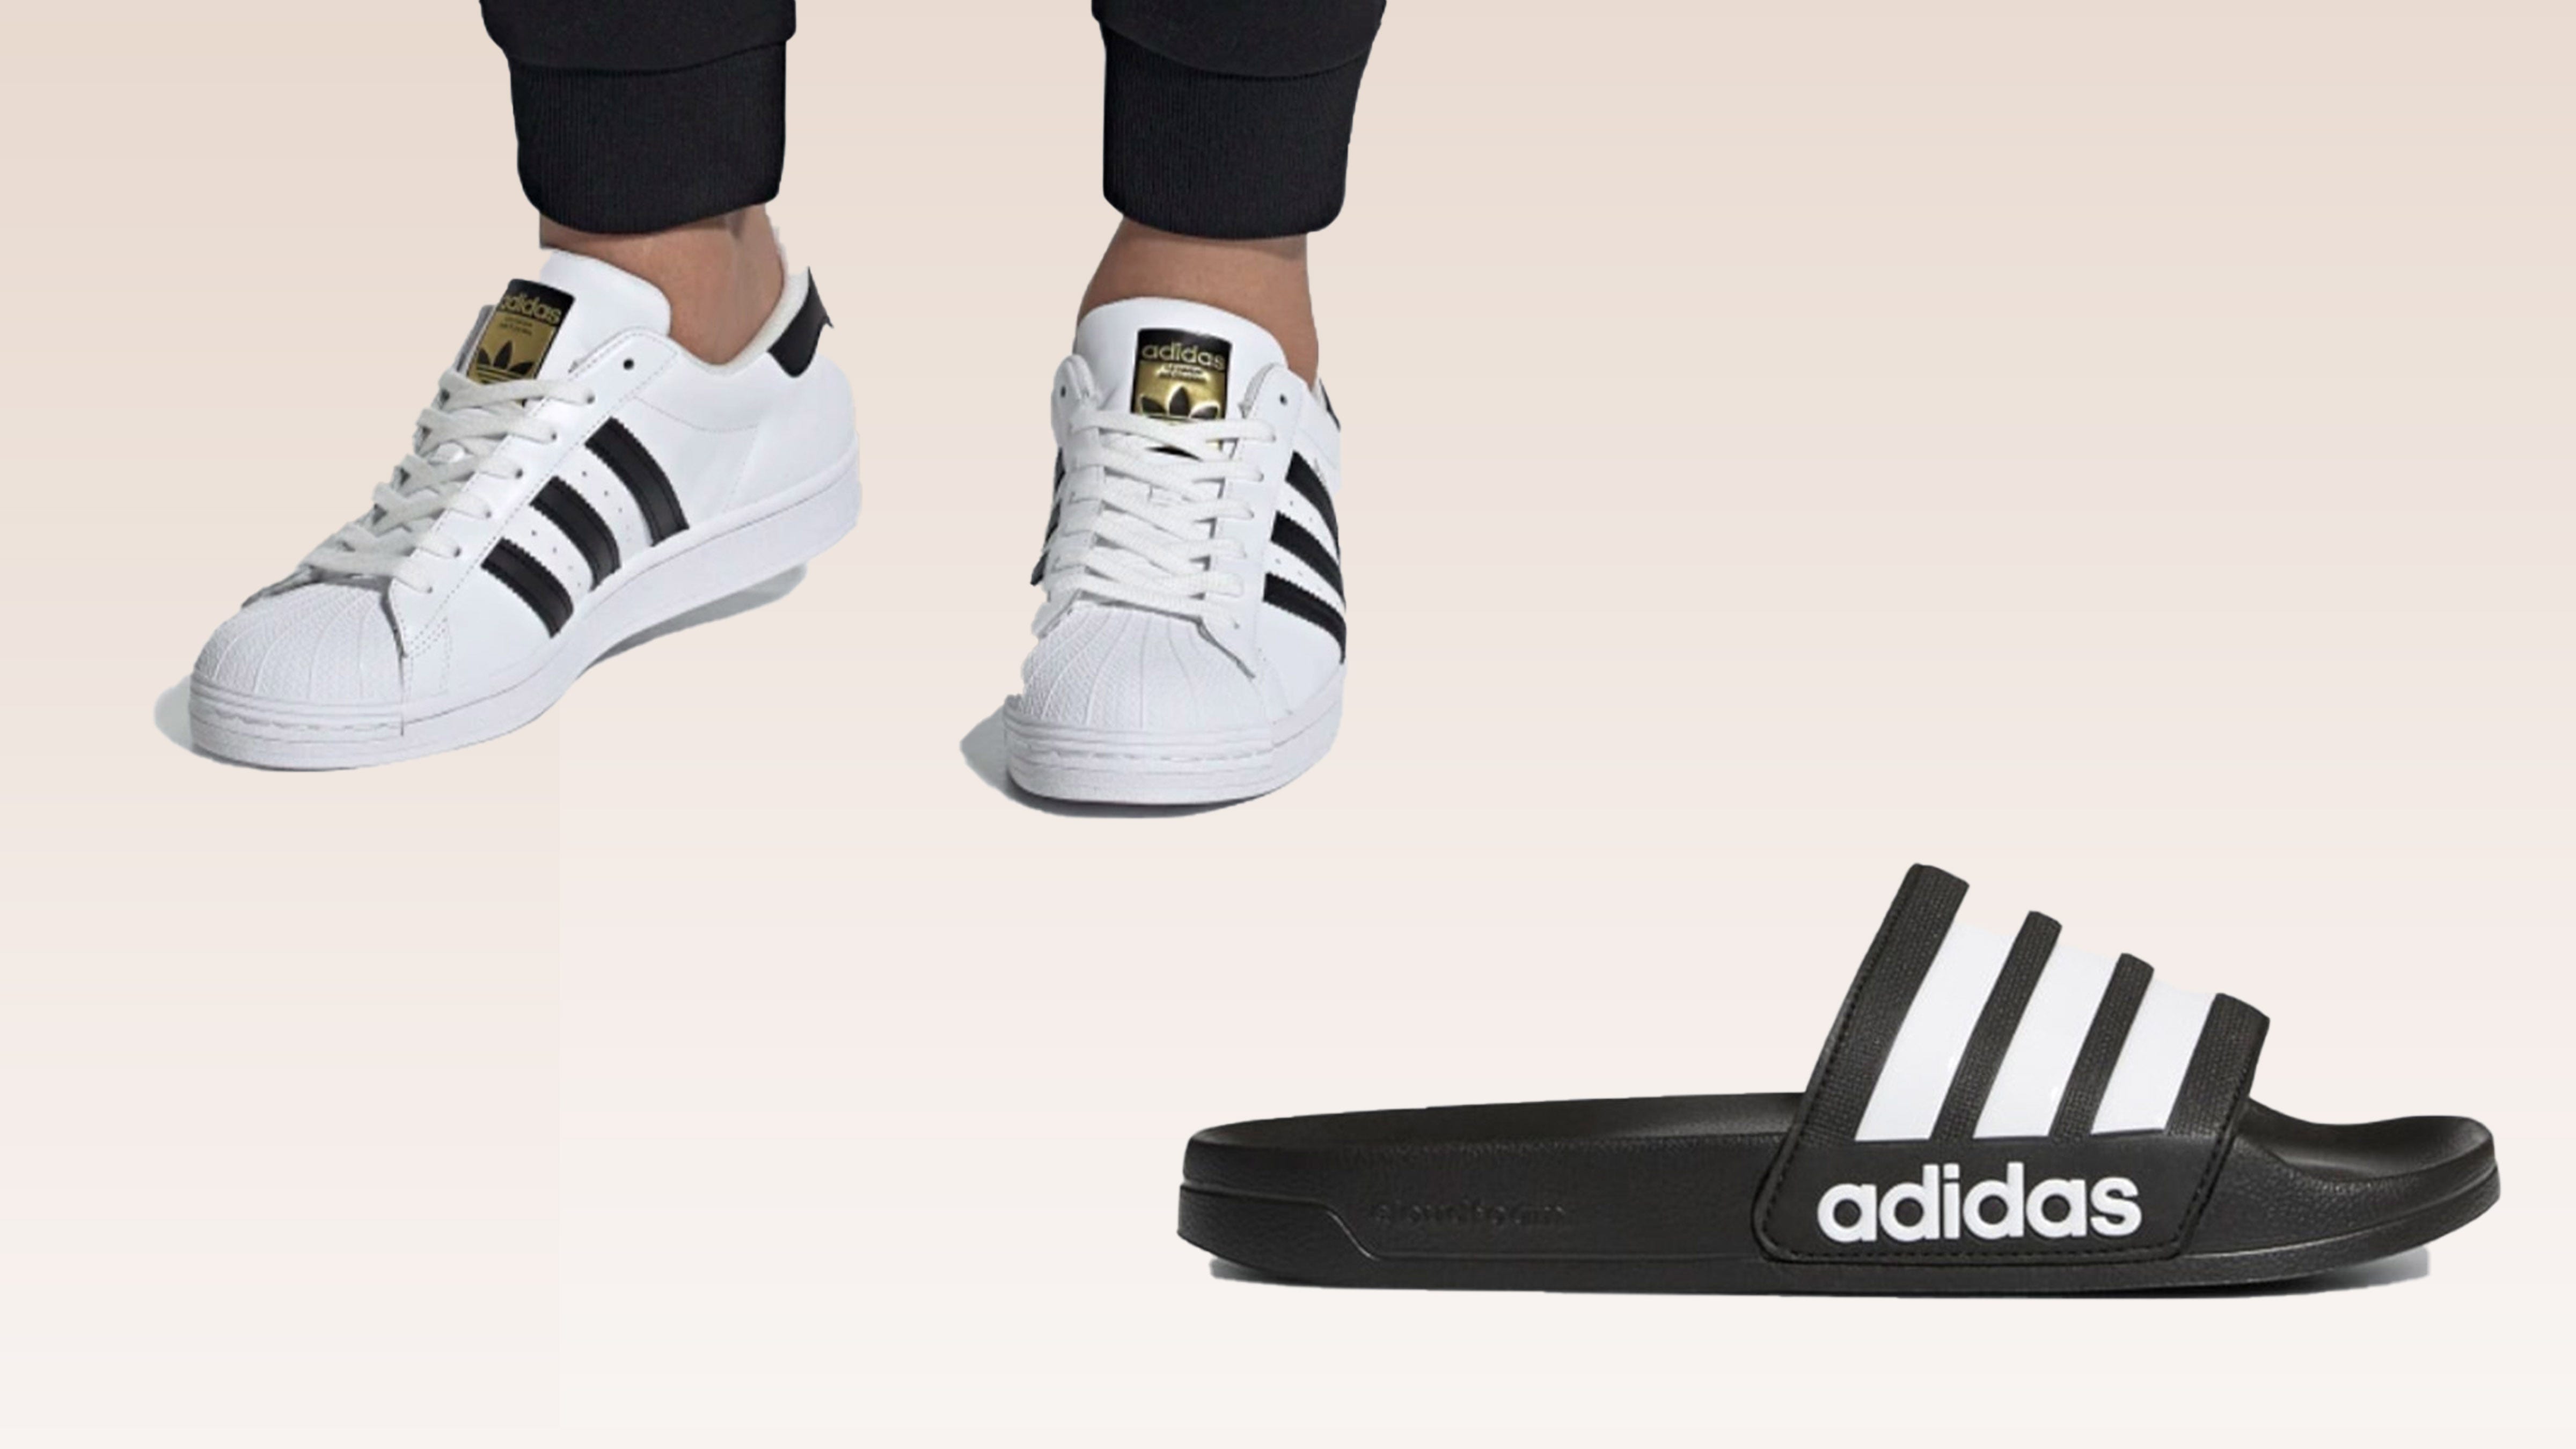 Adidas sale: Save on top-rated shoes and apparel